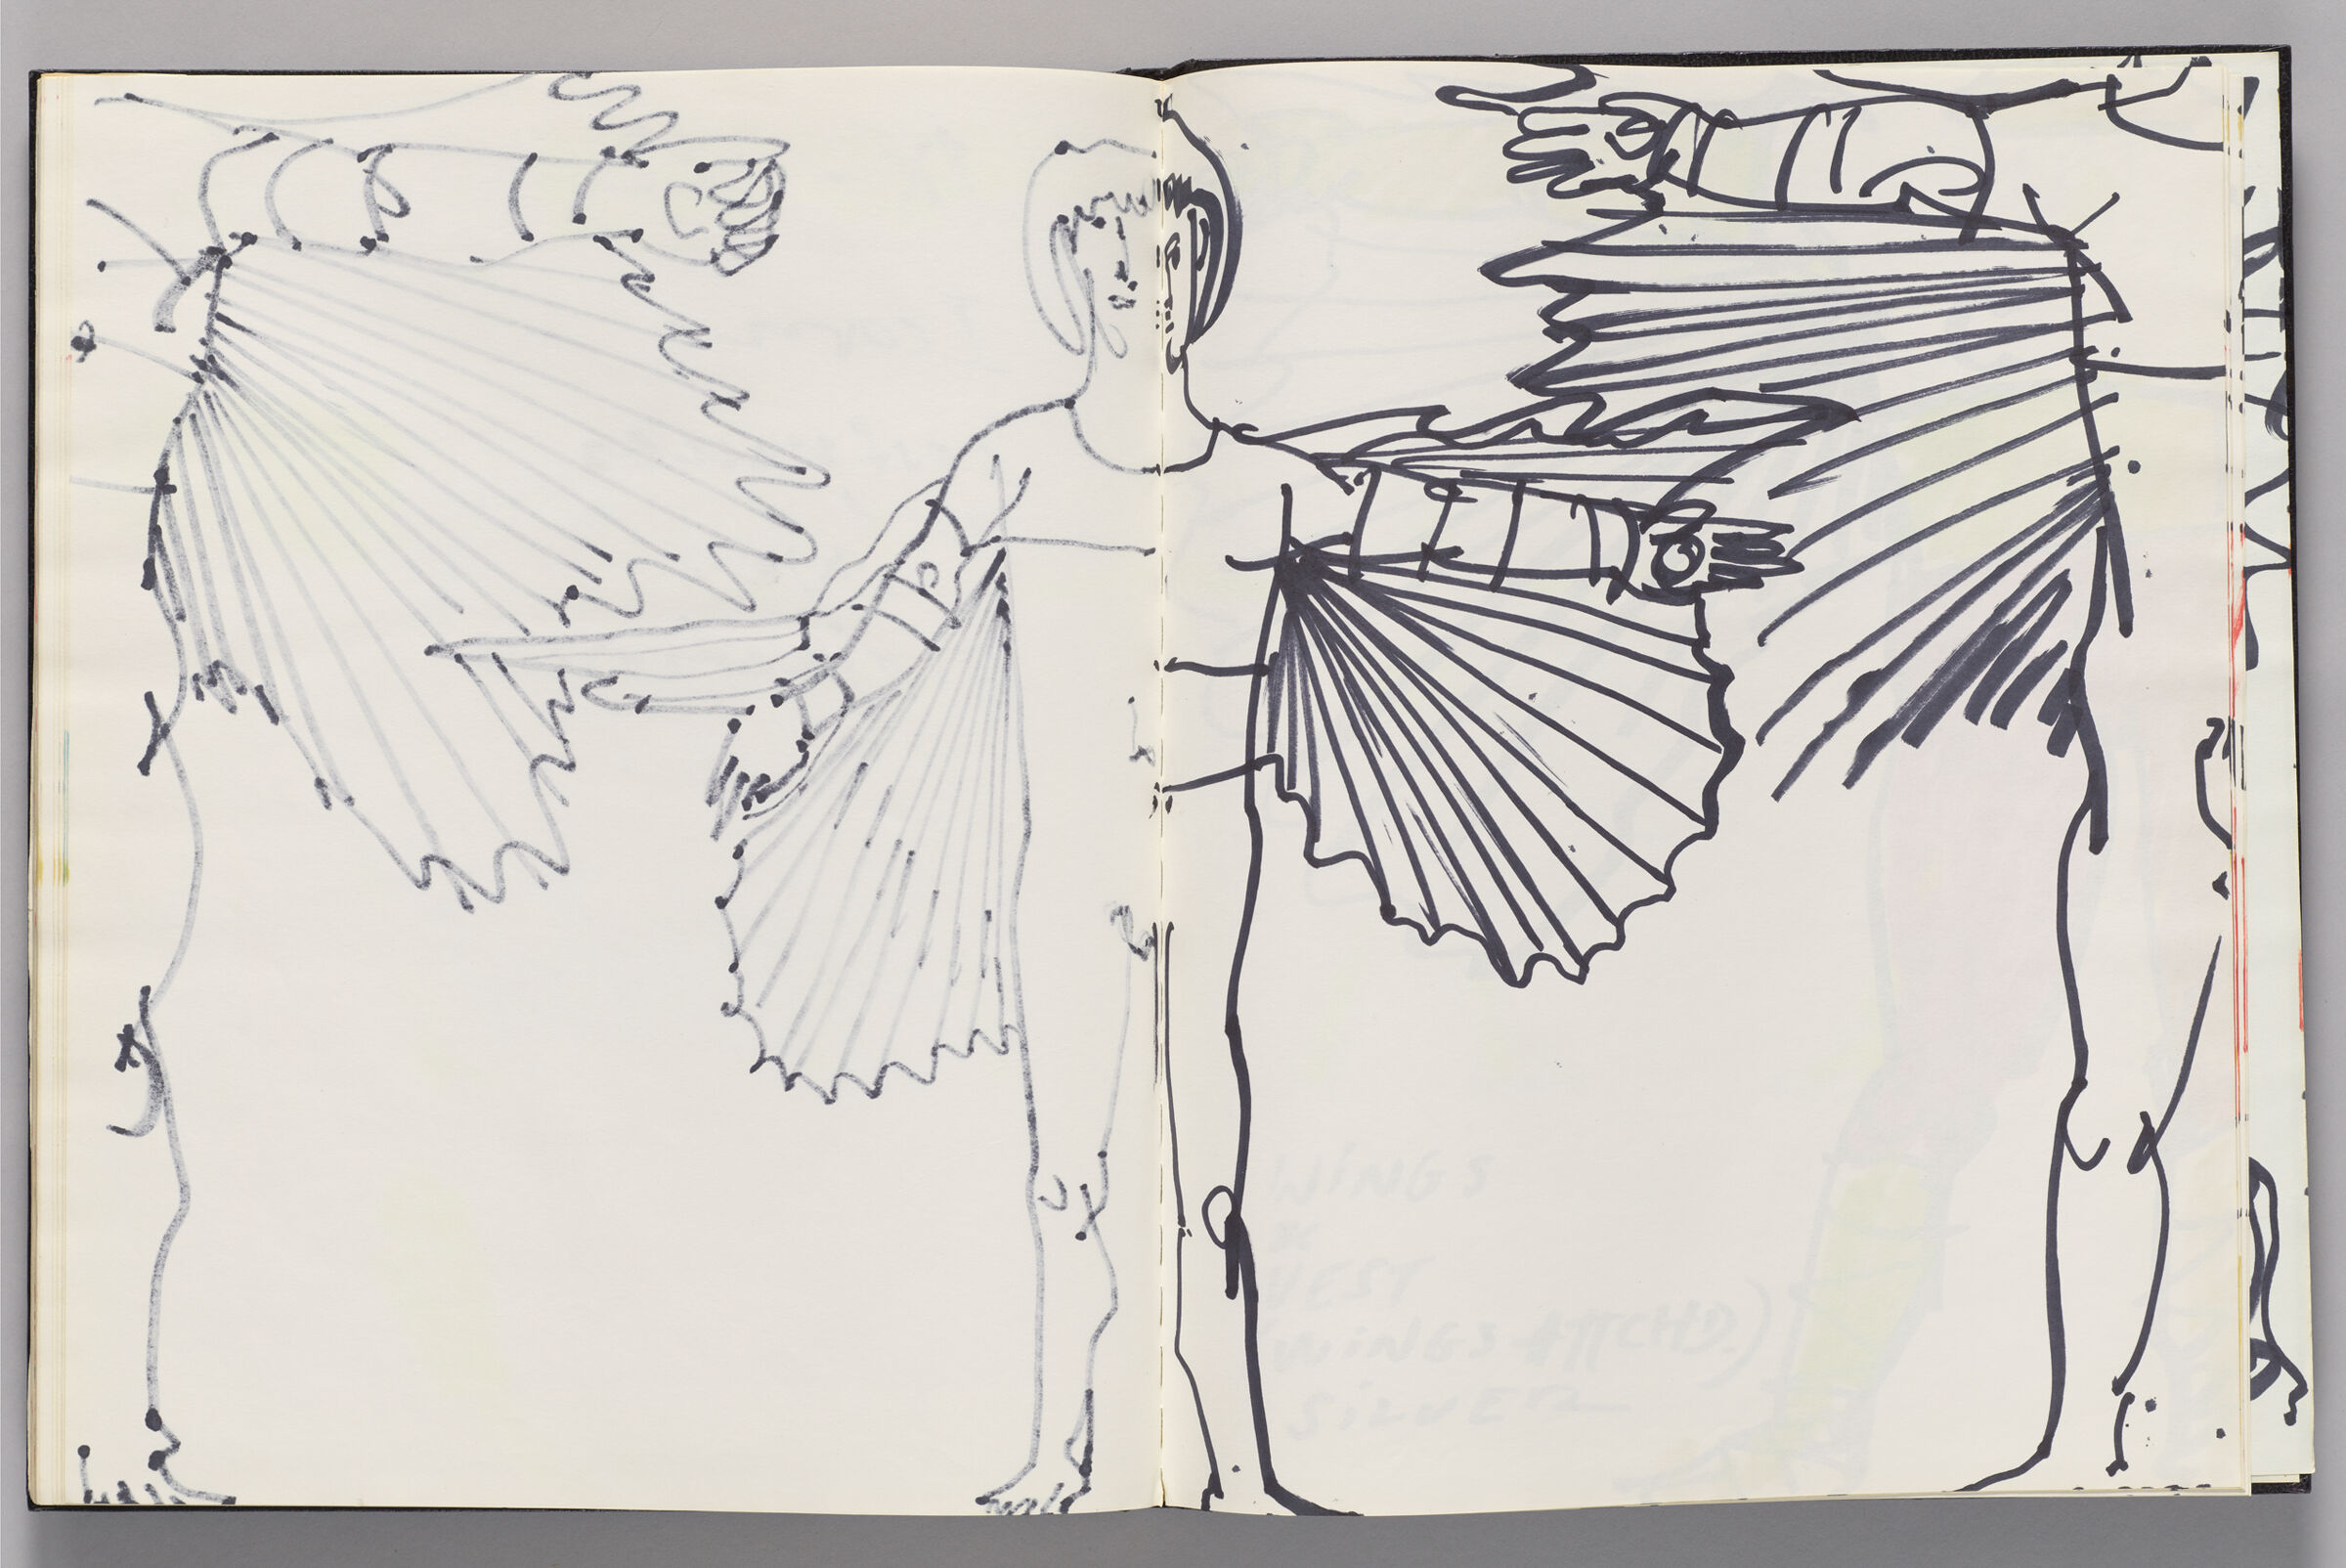 Untitled (Bleed-Through Of Icarus's Body Extended To Icarus Costume Sketches On Right Page, Two-Page Spread)